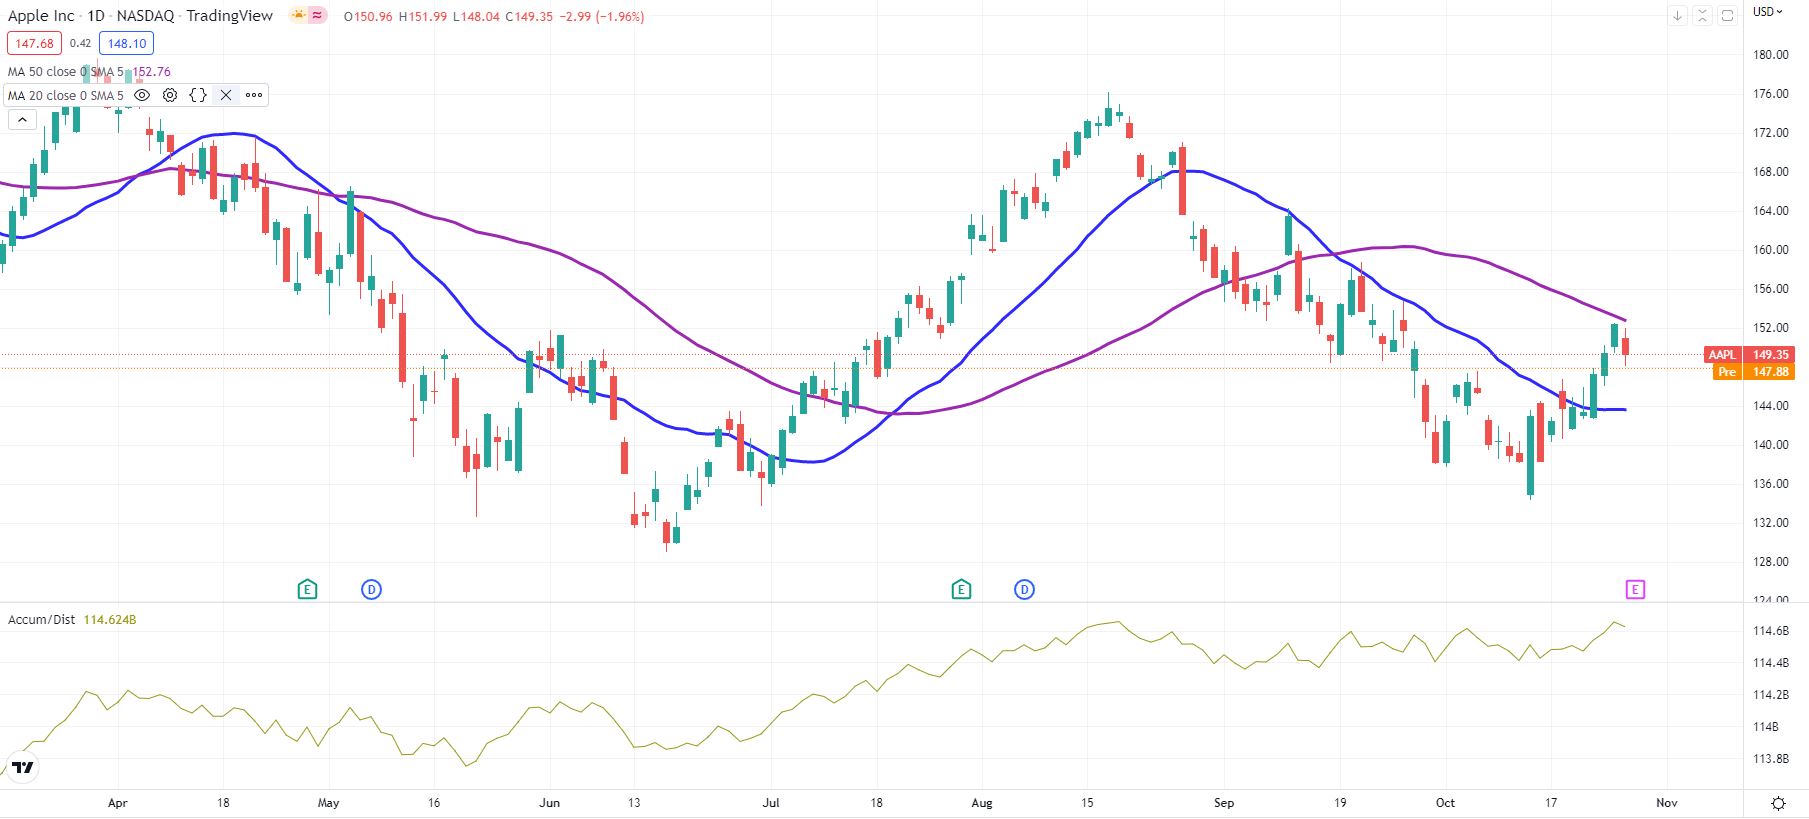 AAPL stock daily chart shows rollercoaster ride in the past few months